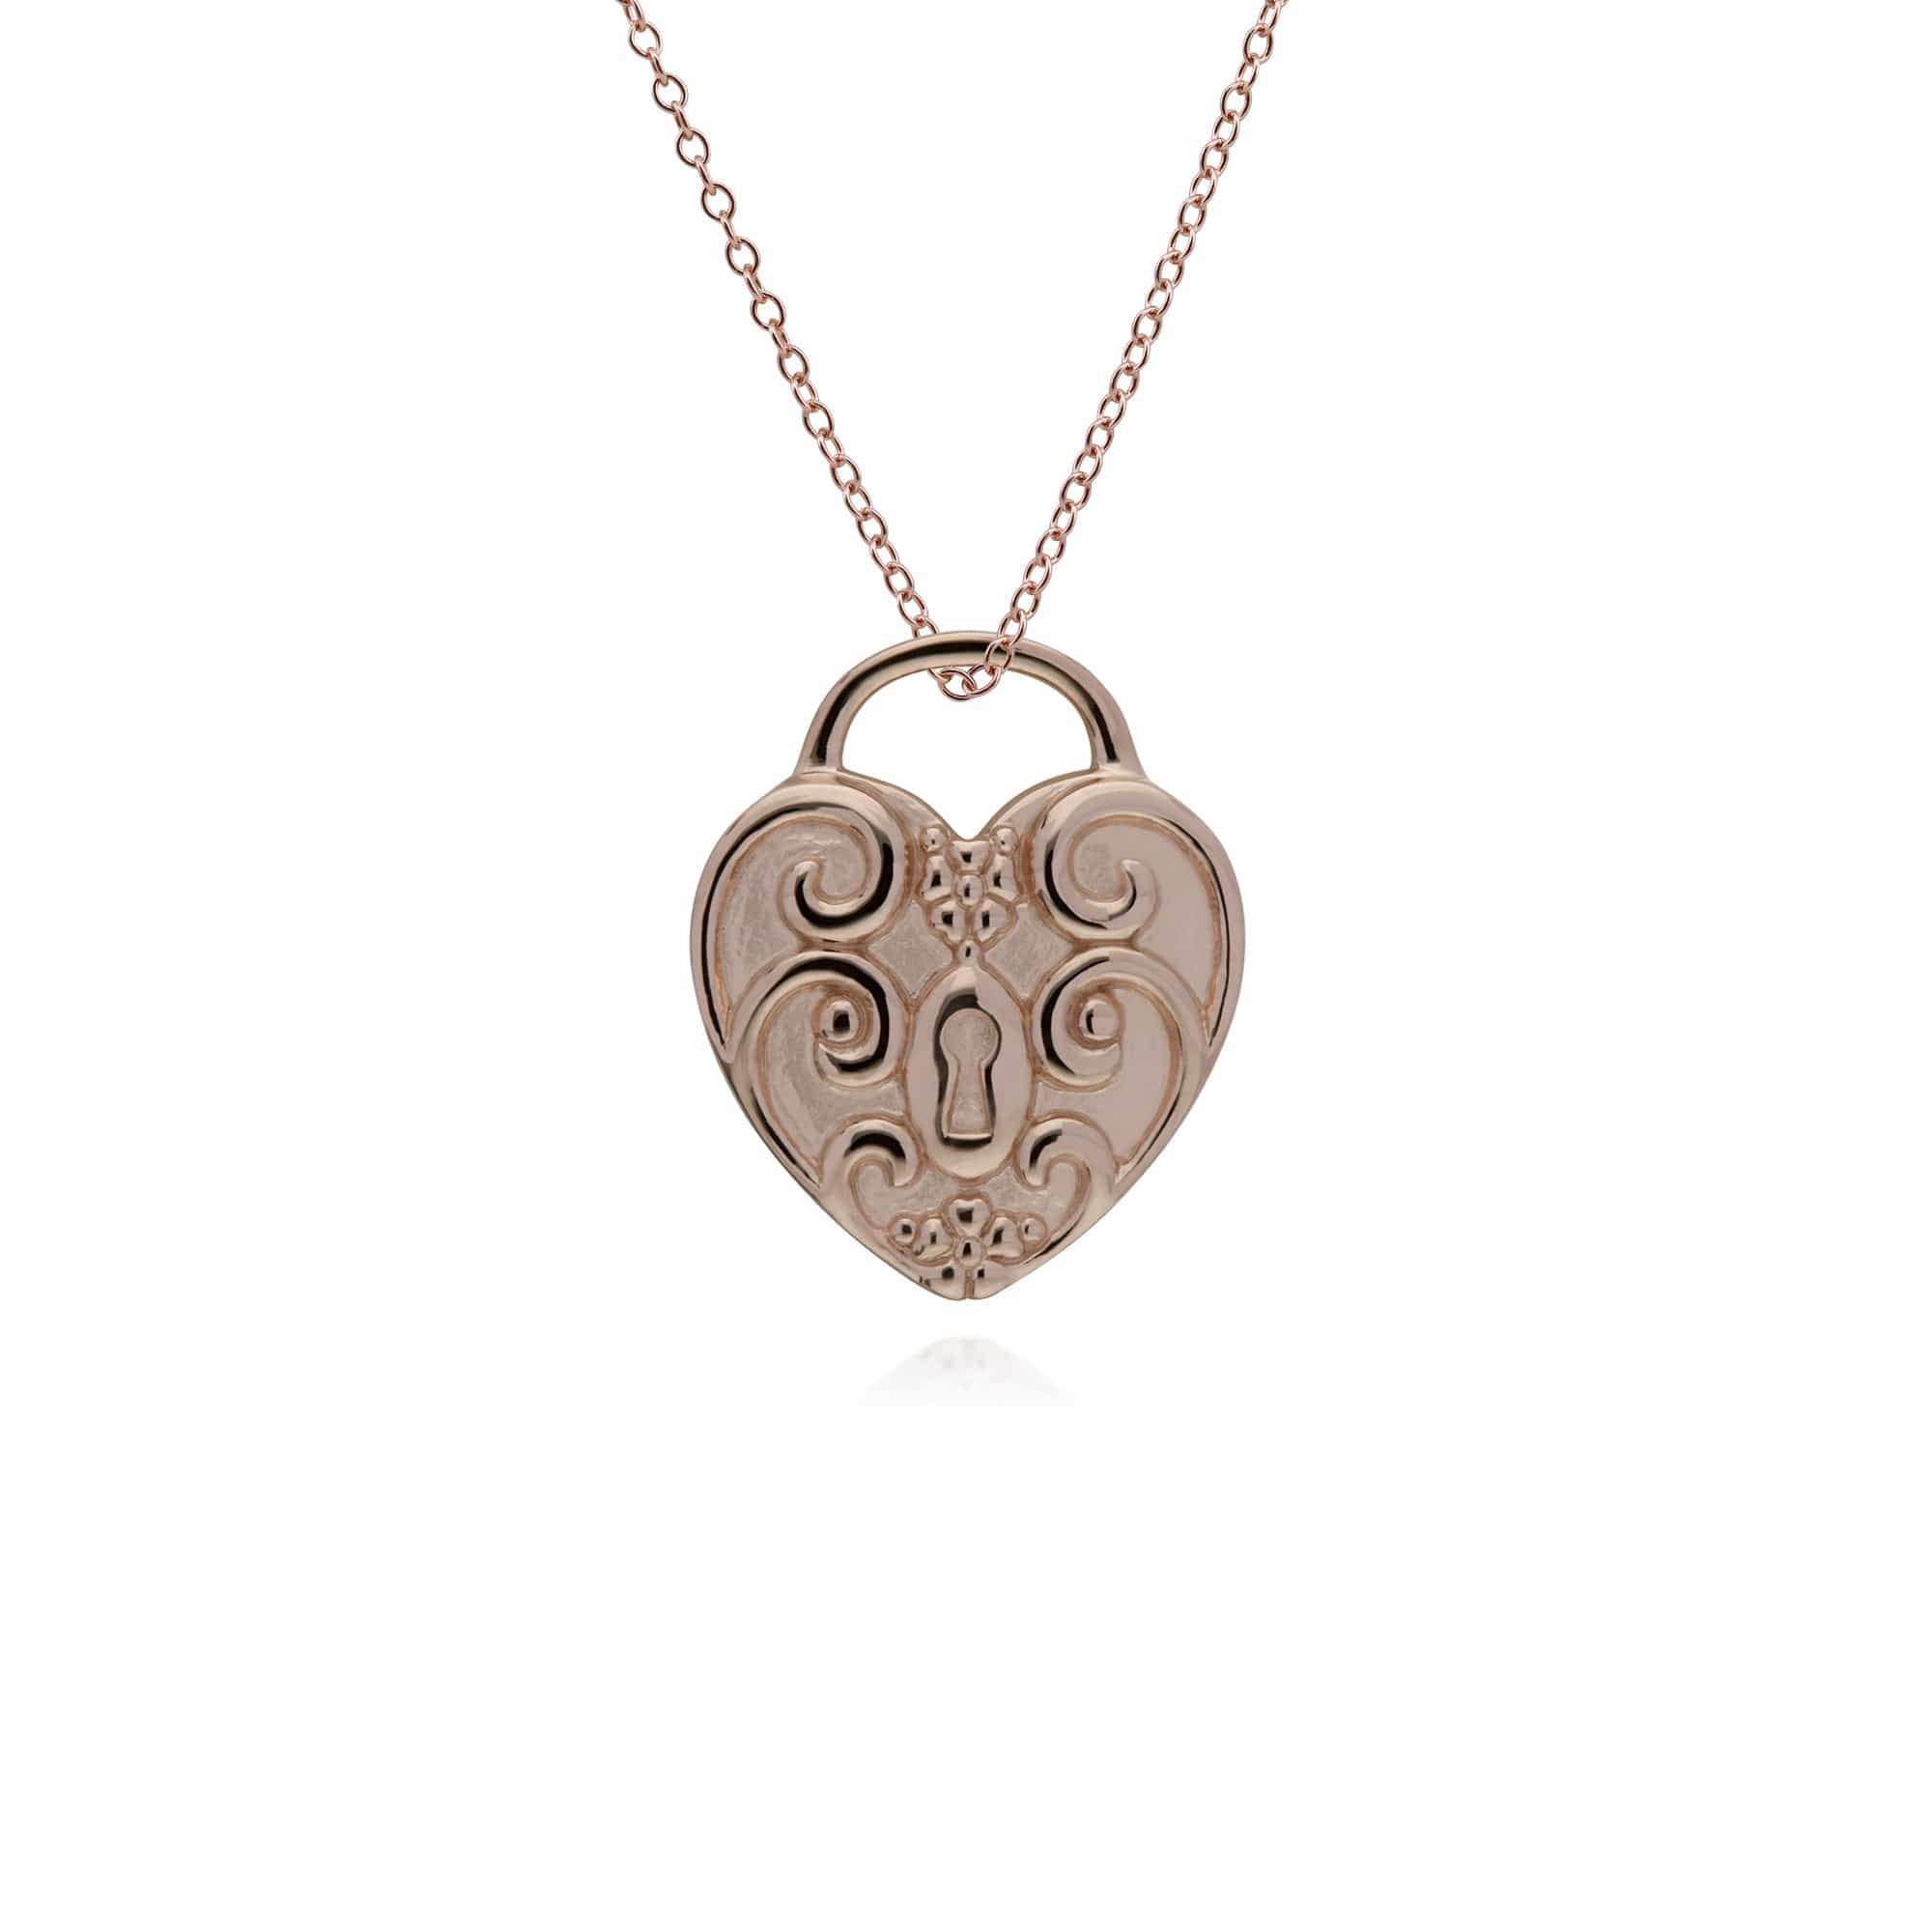 270P028501925-270P026501925 Classic Swirl Heart Lock Pendant & Turquoise Charm in Rose Gold Plated 925 Sterling Silver 3